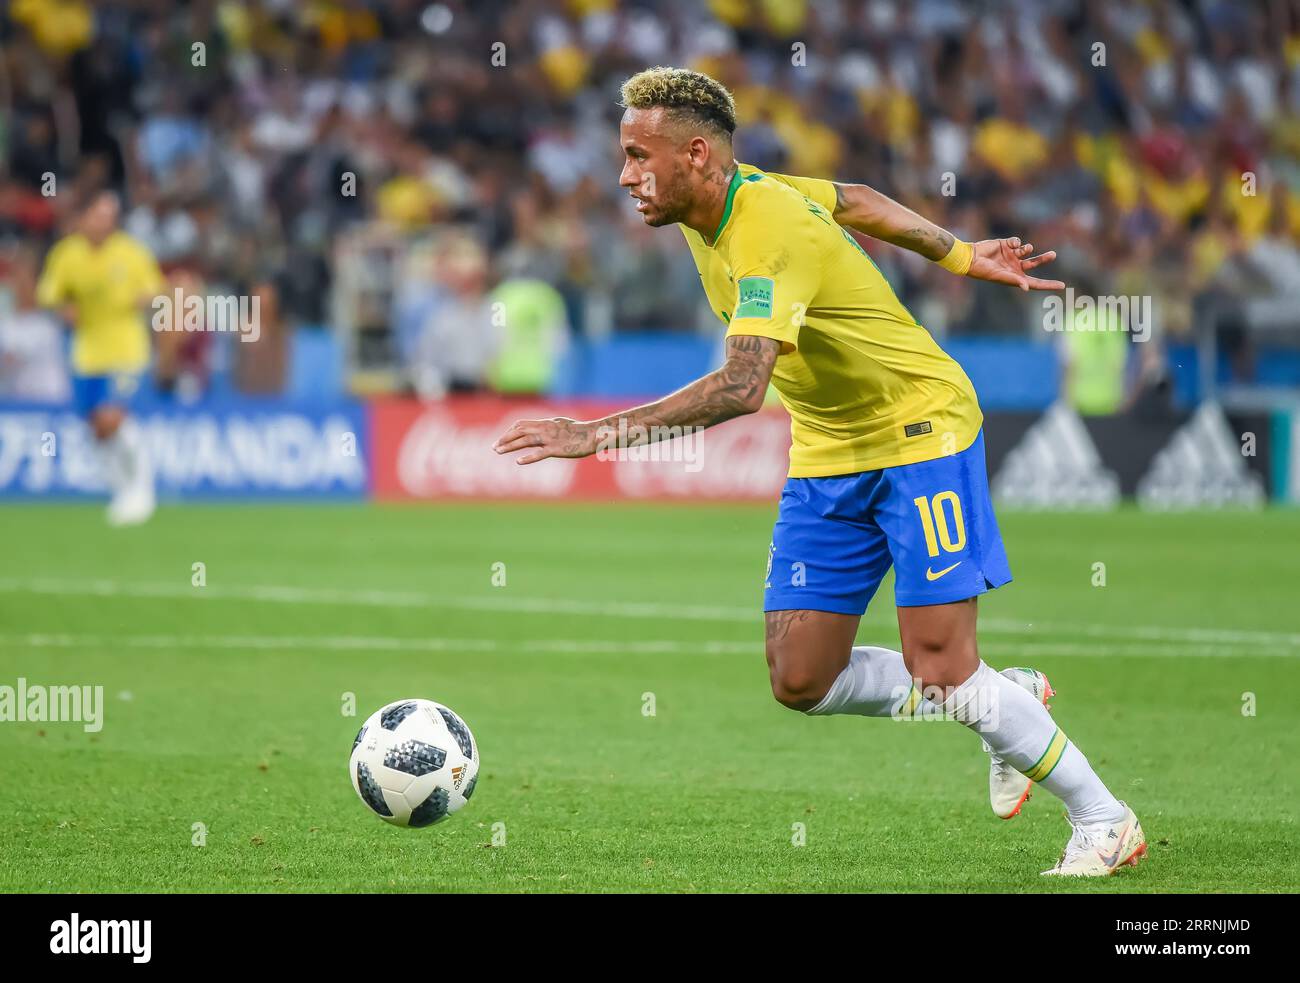 Moscow, Russia - June 27, 2018. Brazil national football team striker Neymar in action during FIFA World Cup 2018 match Serbia vs Brazil (0-2). Stock Photo